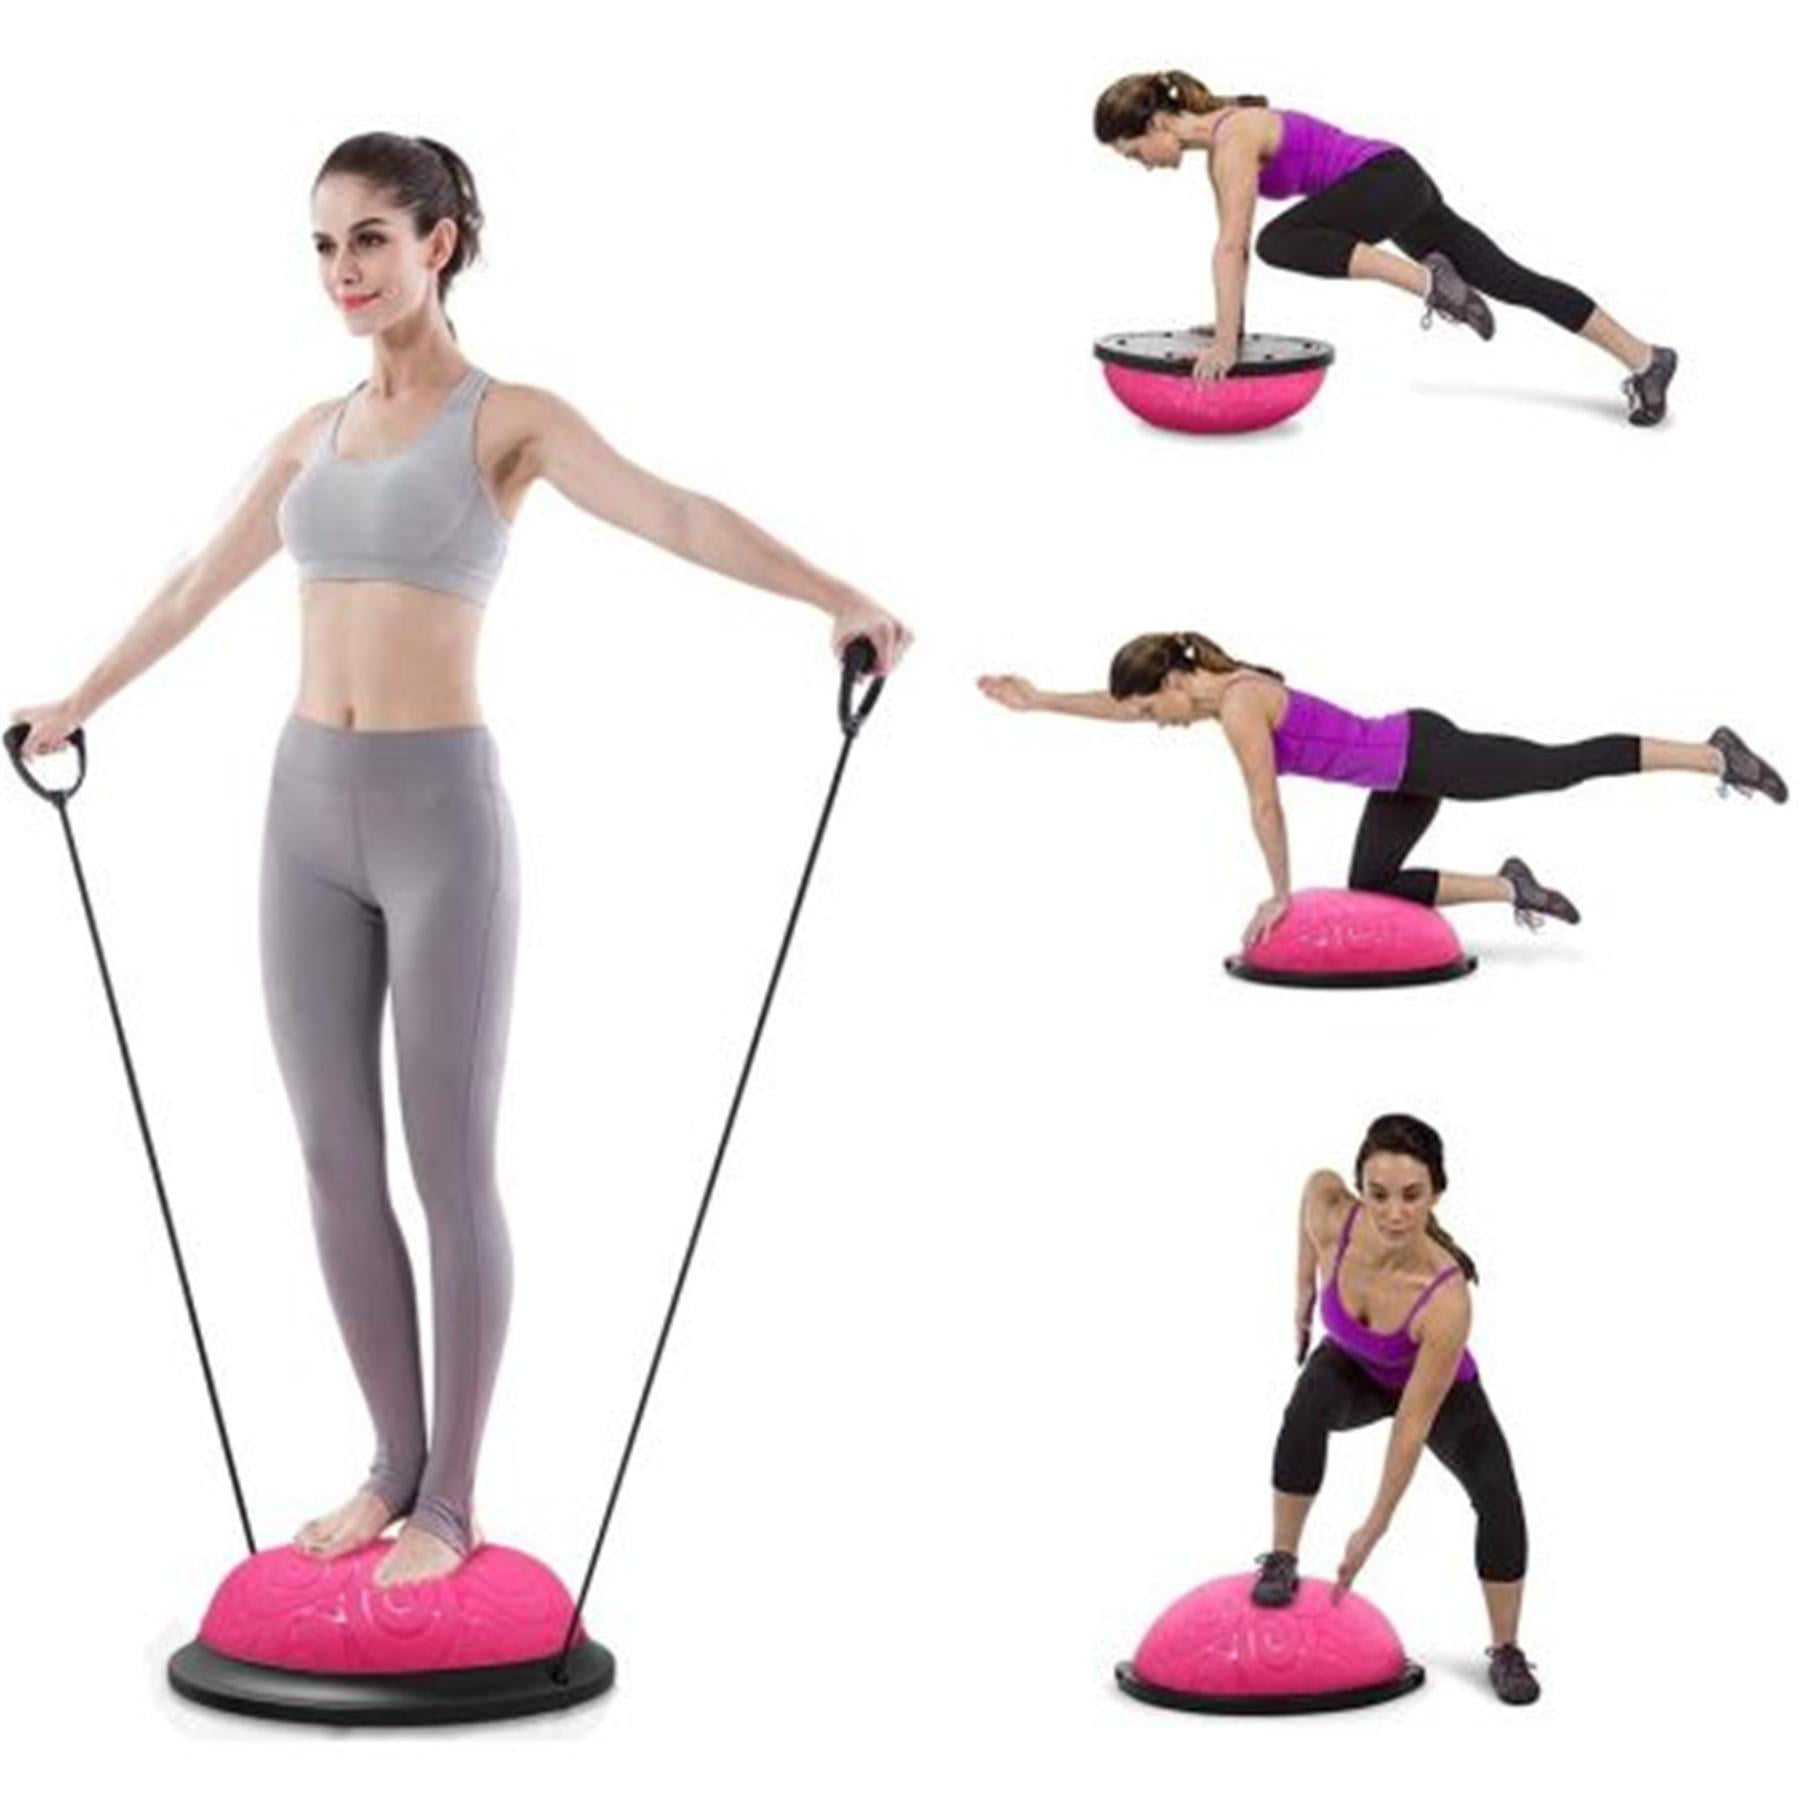 24.4" Balance Training Half Ball for Gym Exercise Yoga Fitness Workout with Pump 